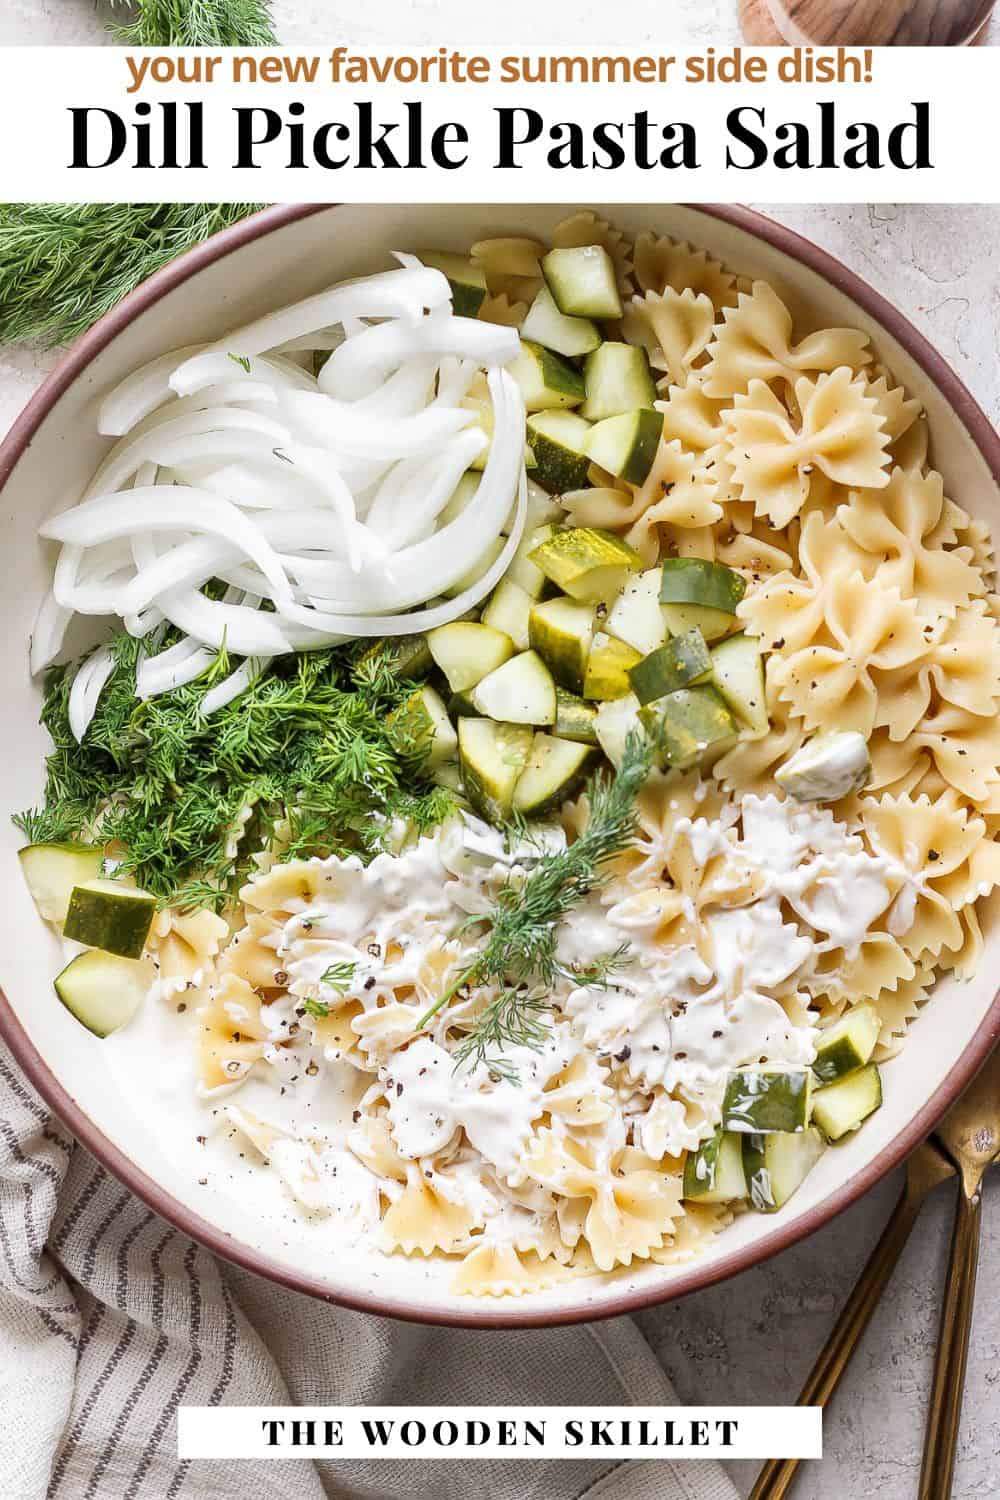 Pinterest image for dill pickle pasta salad.